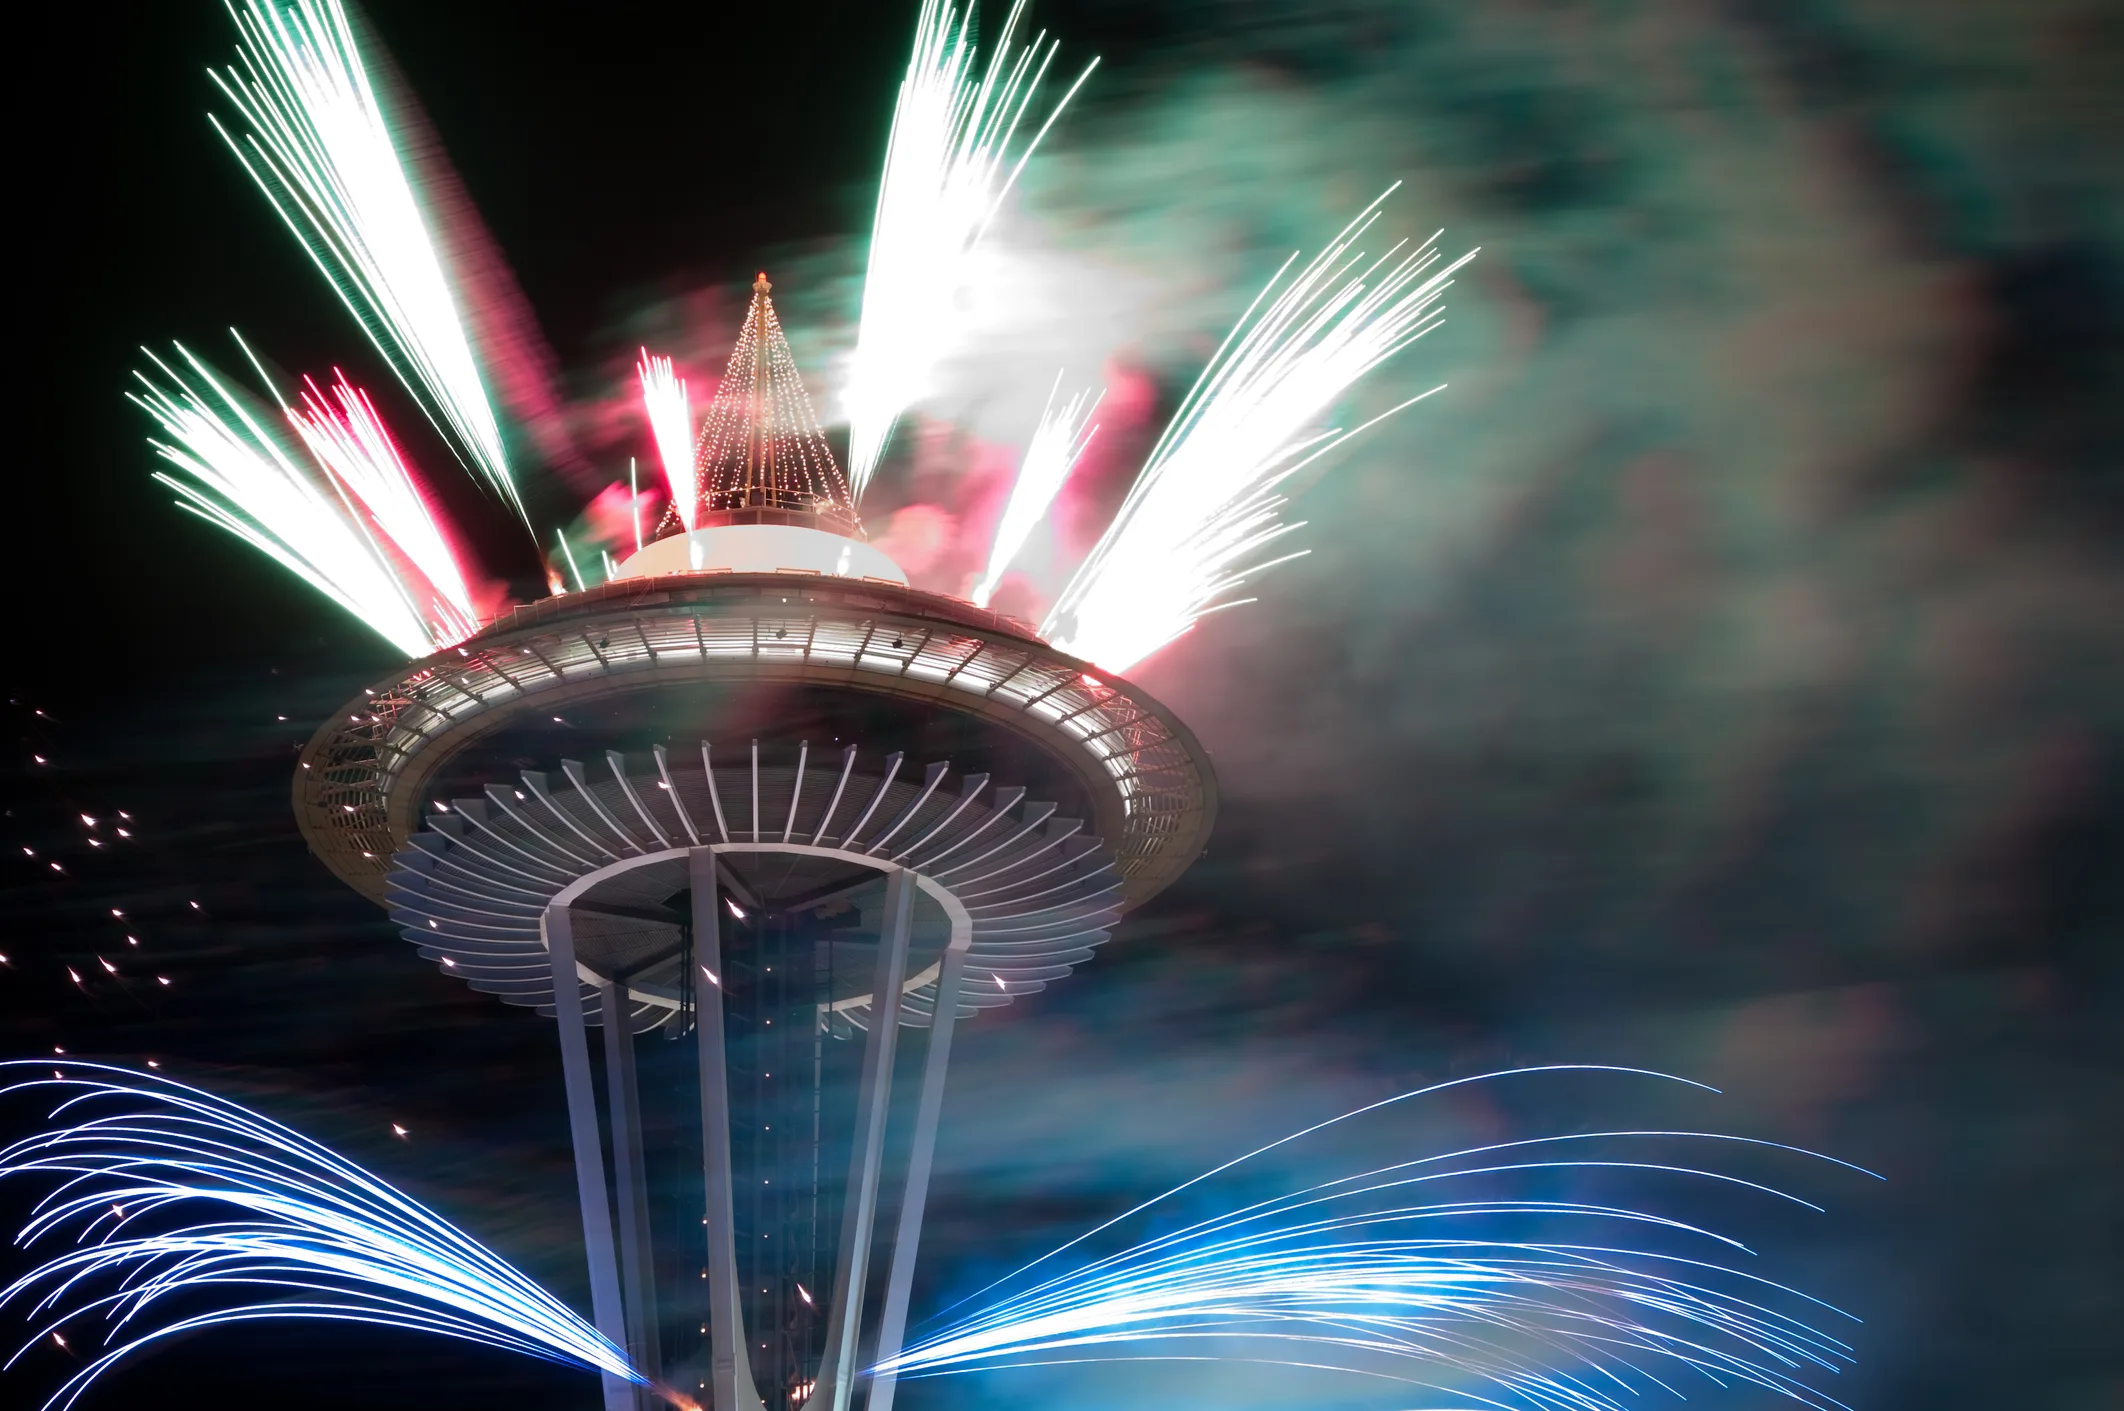 Seattle Space Needle illuminated by fireworks at midnight on New Years Eve.